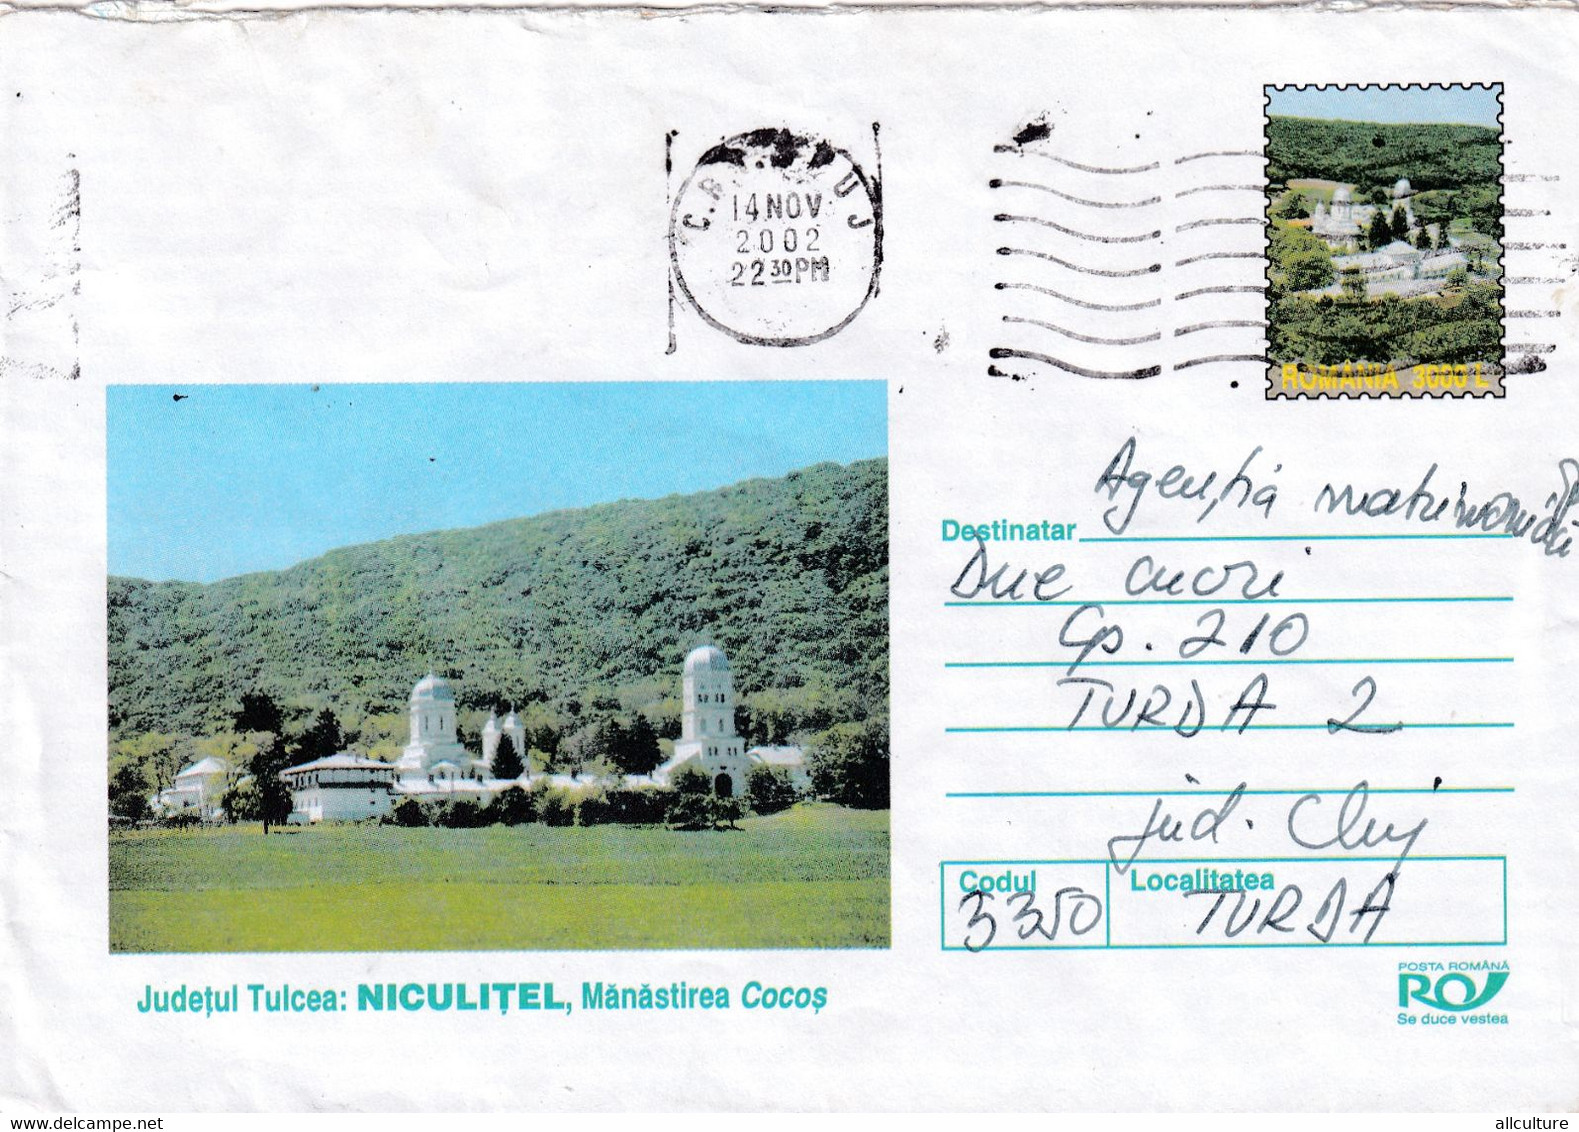 A9597- ROOSTER MONASTERY TULCEA NICULITEL ROMANIA COVER STATIONERY,CLUJ 2002 SENT TO TURDA CLUJ - Abbayes & Monastères